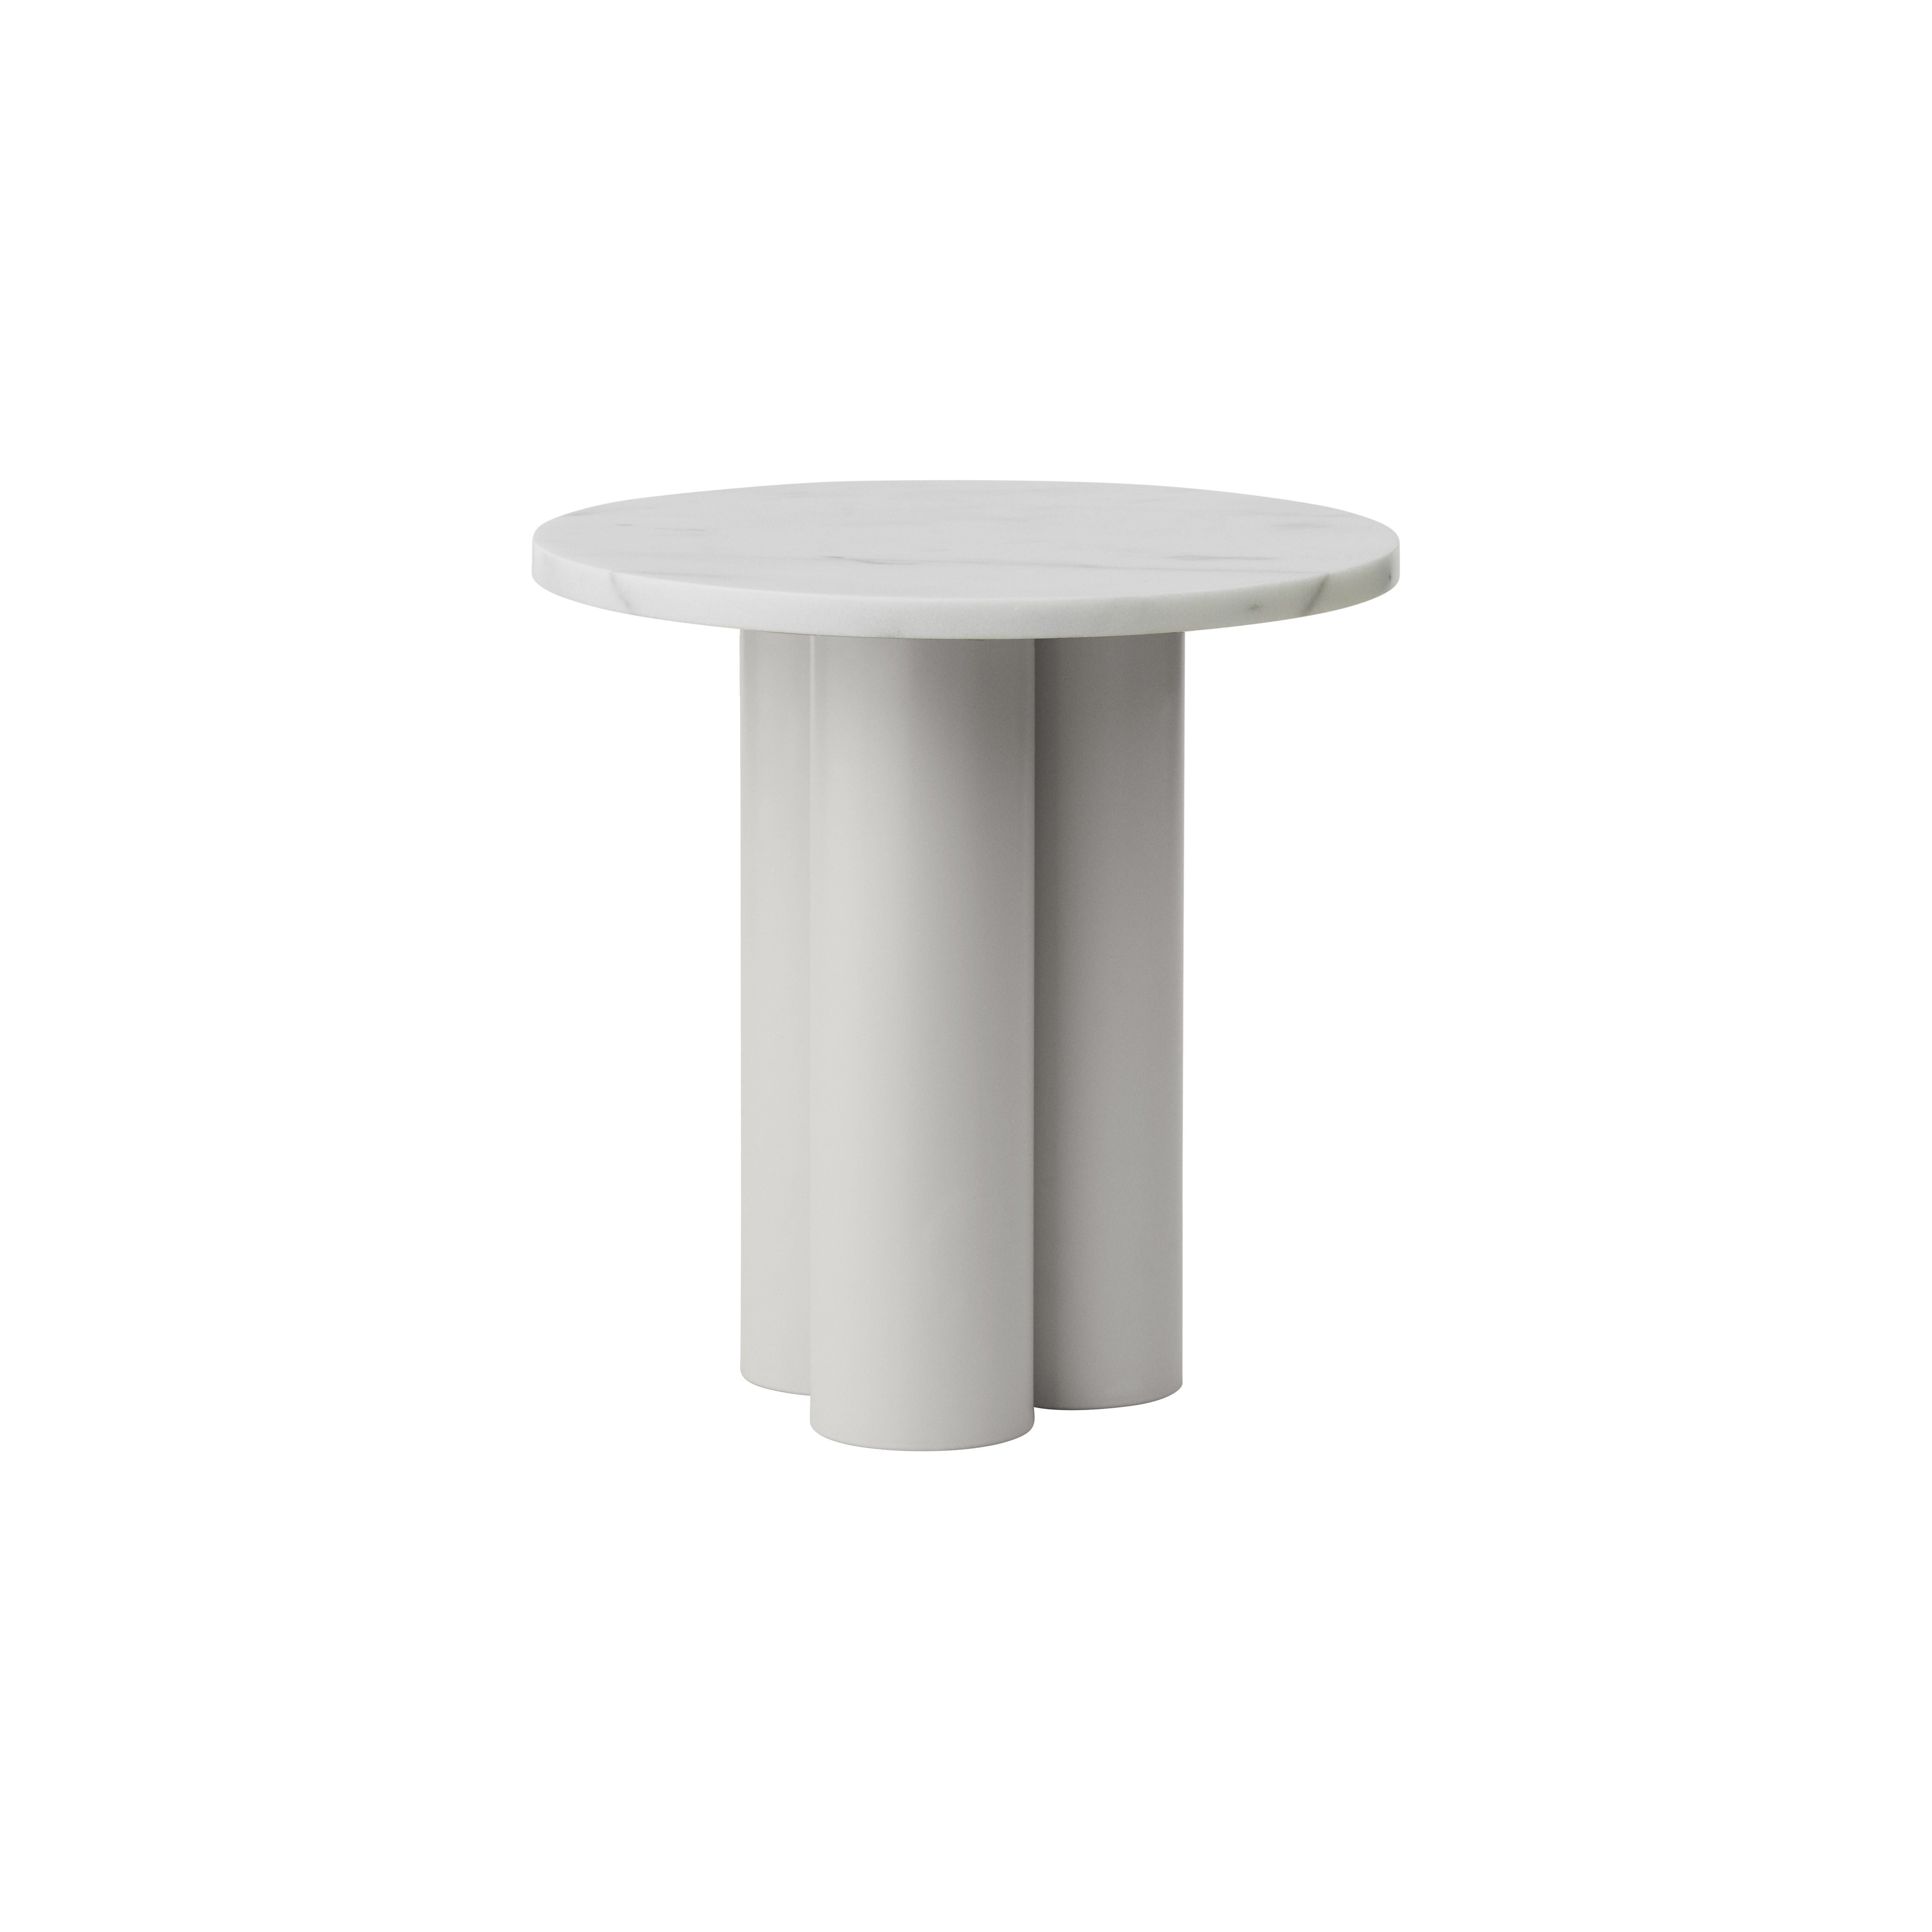 https://media.madeindesign.com/nuxeo/products/6/6/table-d-appoint-dit-marbre-carrare-blanc-pied-sable_madeindesign_416930_original.jpg